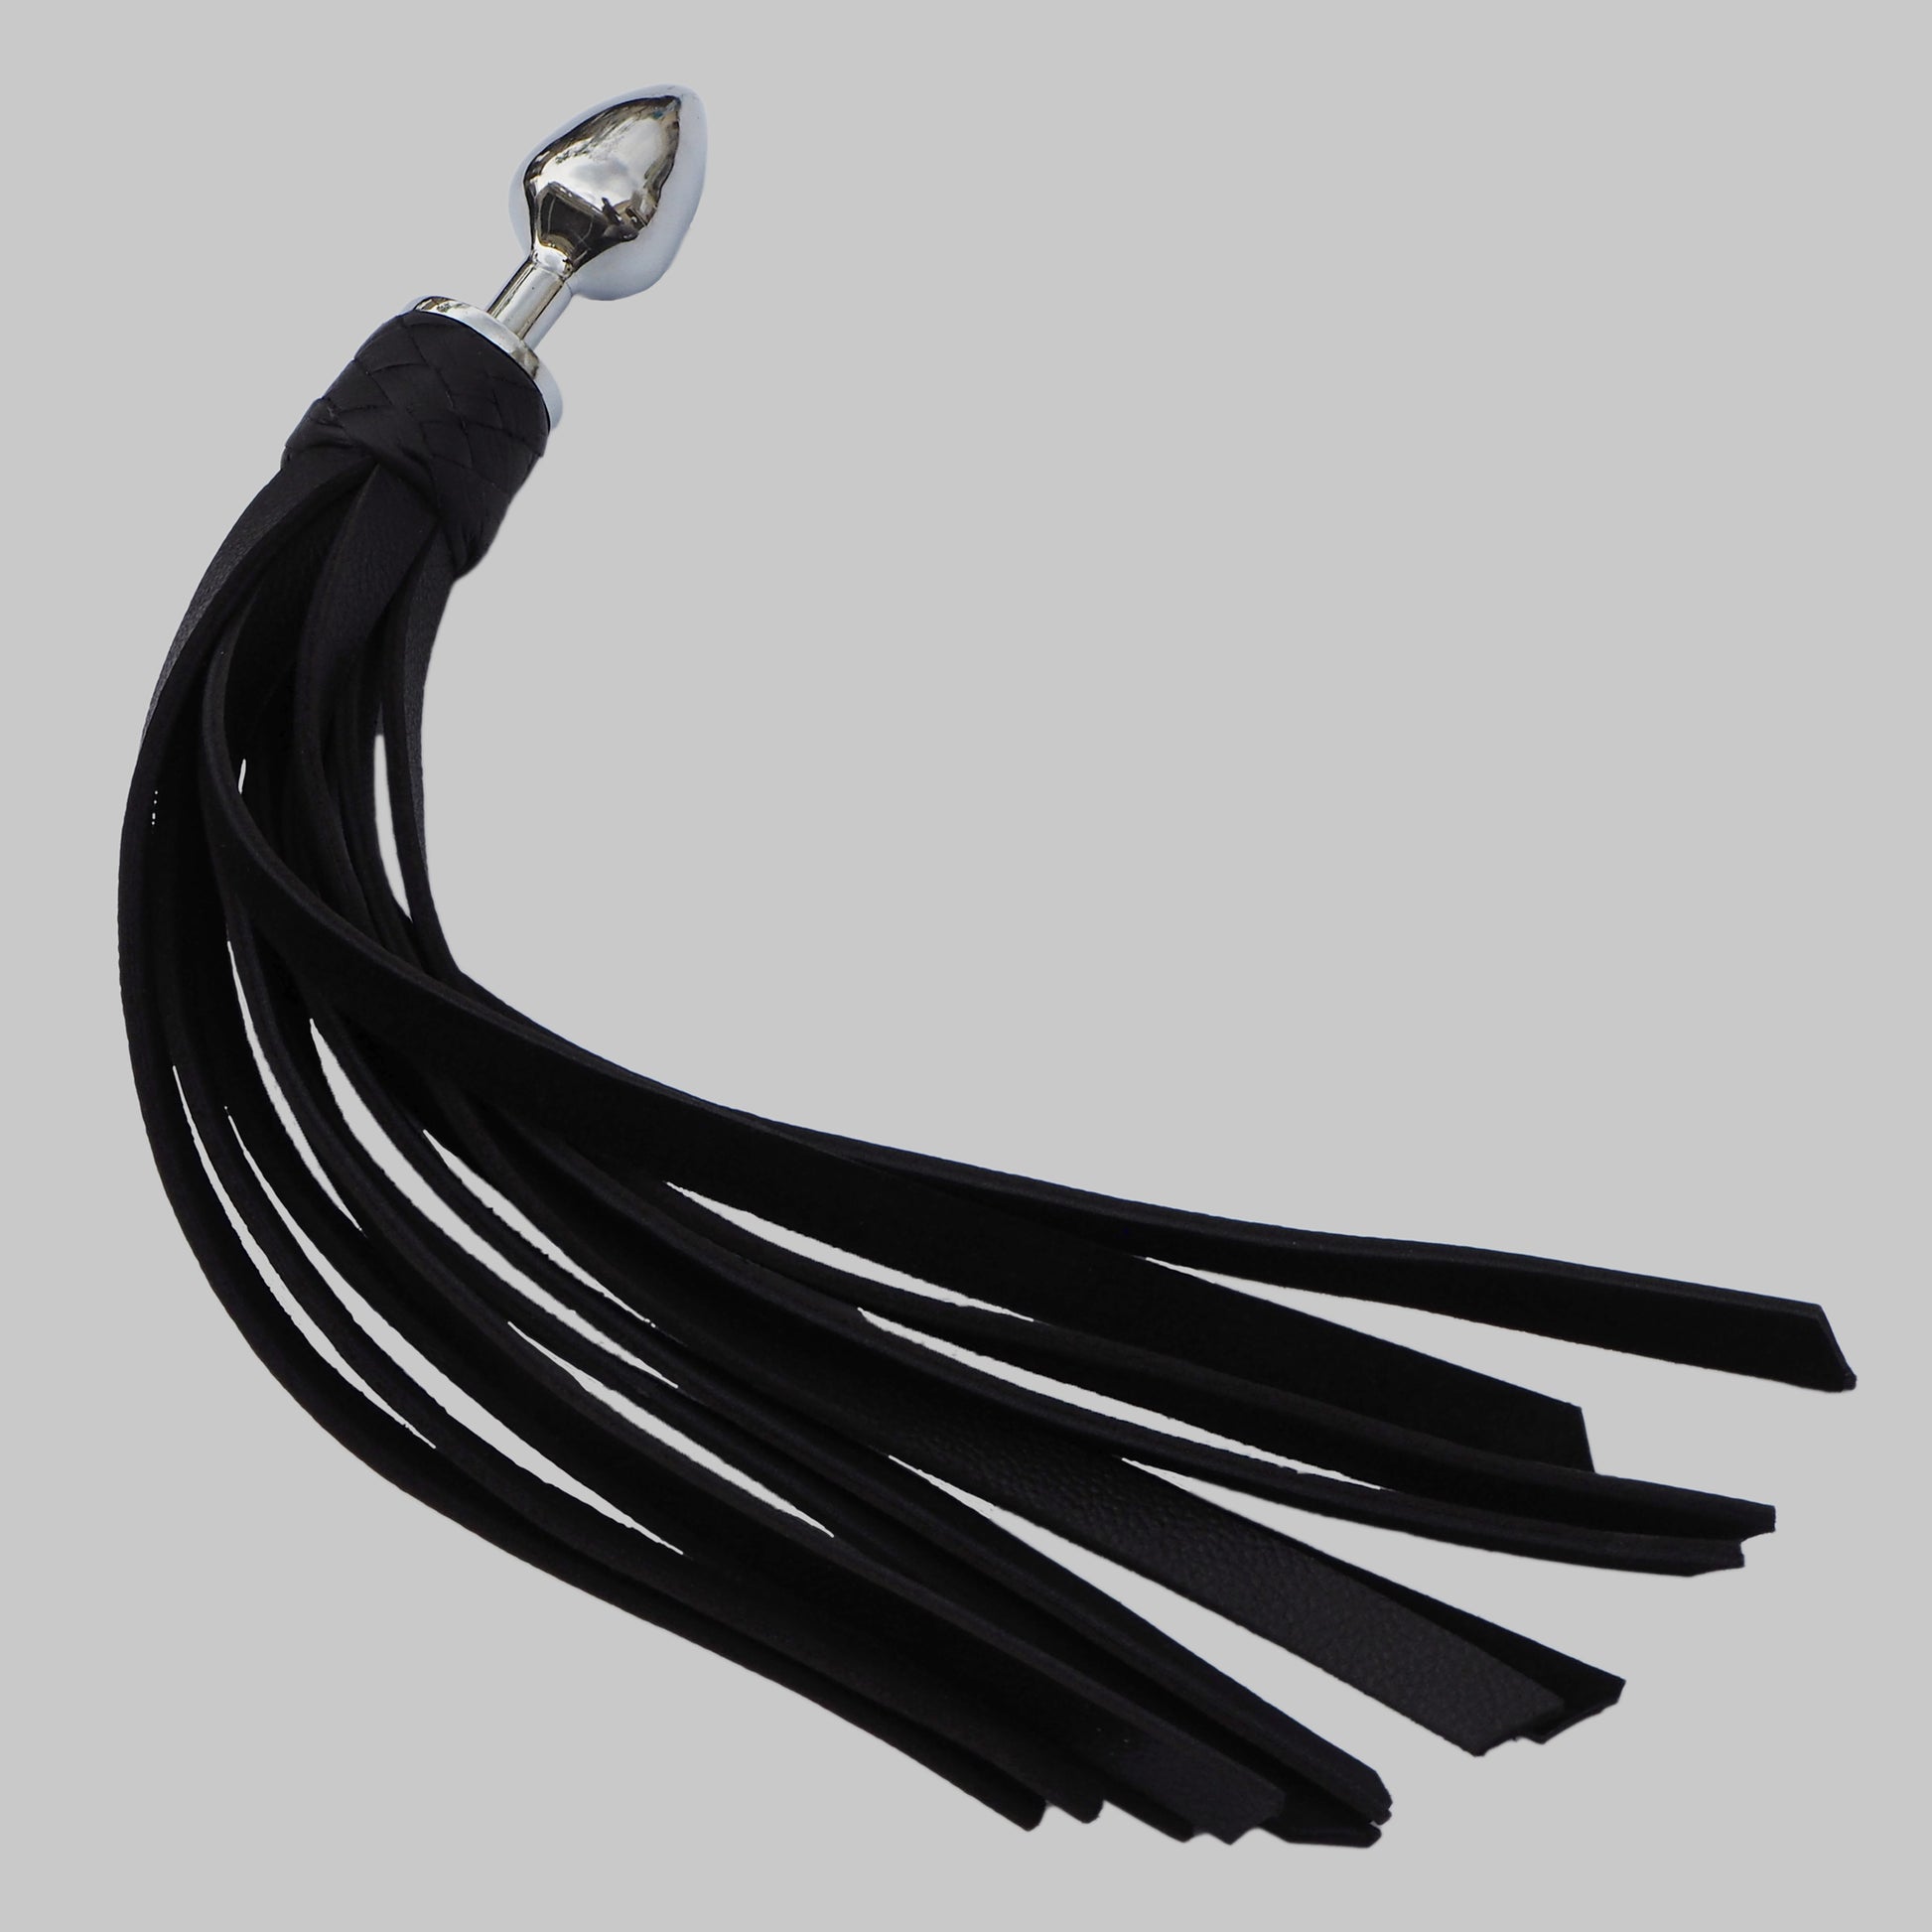 SUBCULTURE Butt Plug Flogger - Subculture